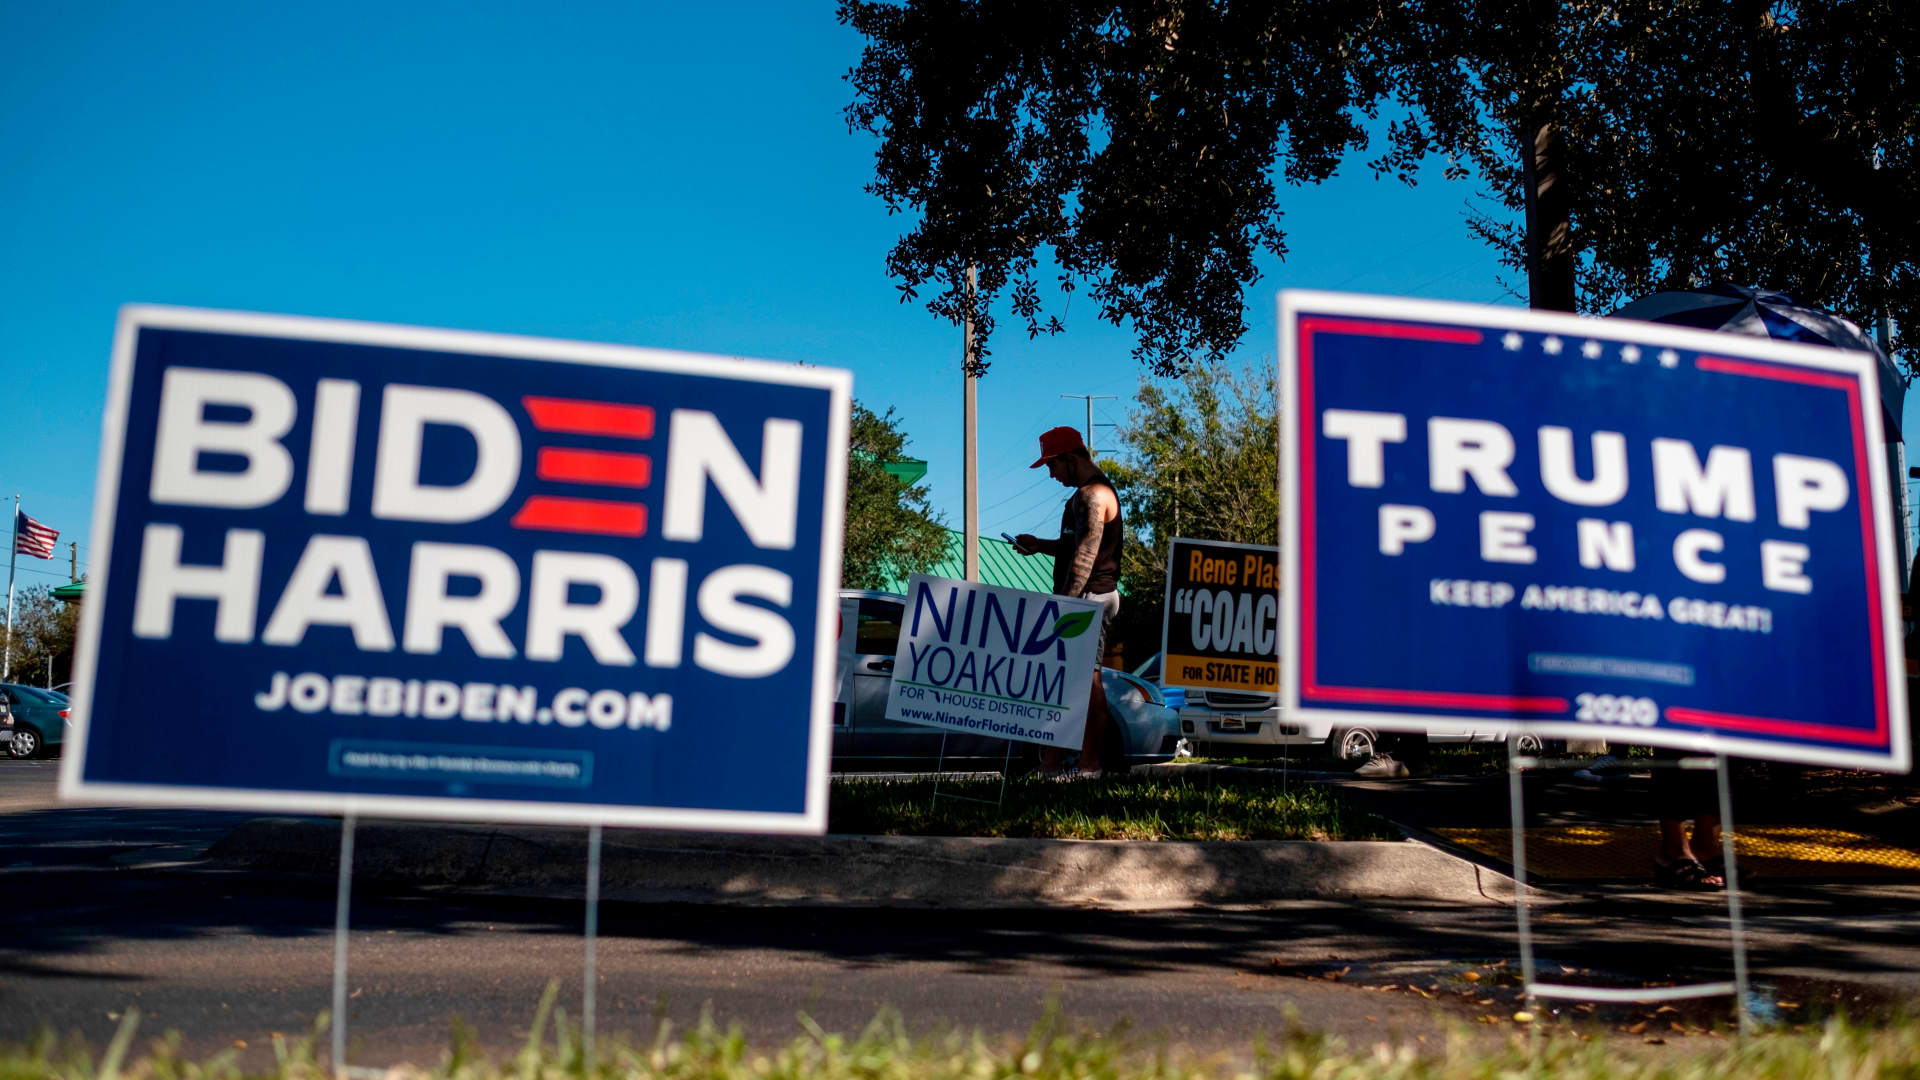 Biden and Trump campaign signs are displayed as voters line up to cast their ballots during early voting at the Alafaya Branch Library in Orlando, Florida, Oct. 30, 2020.